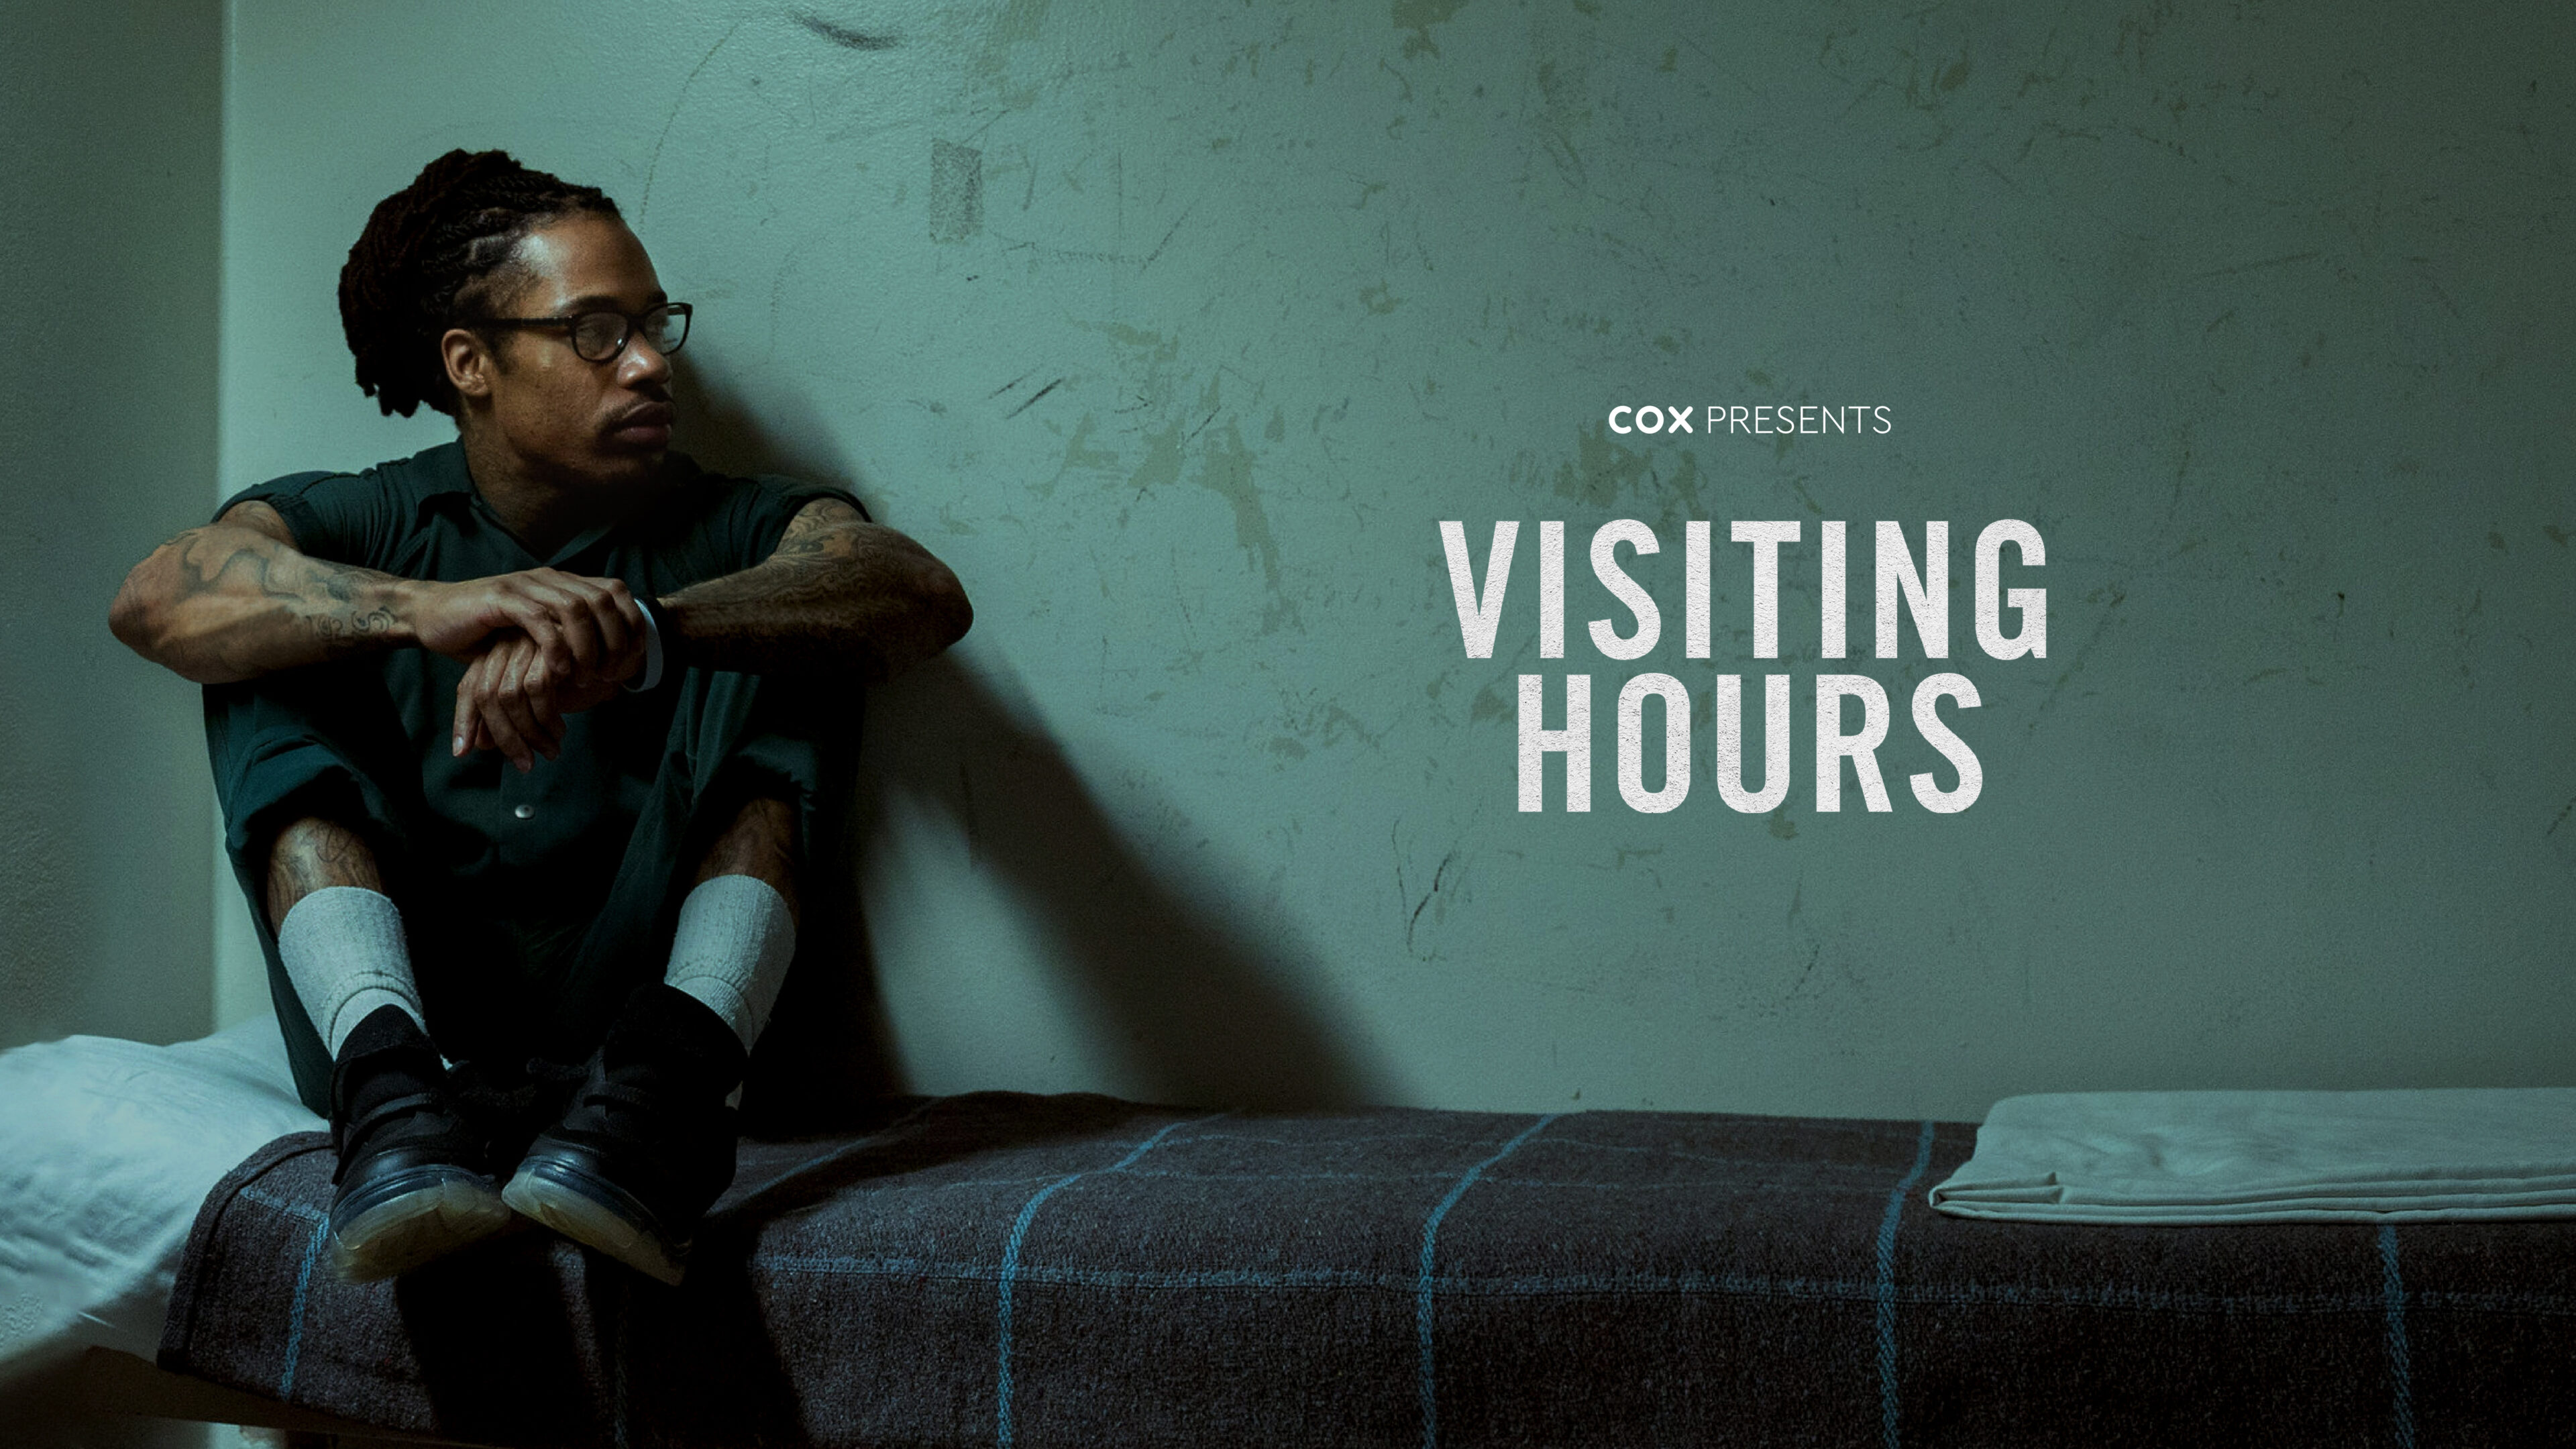 Campaign image for Visiting Hours